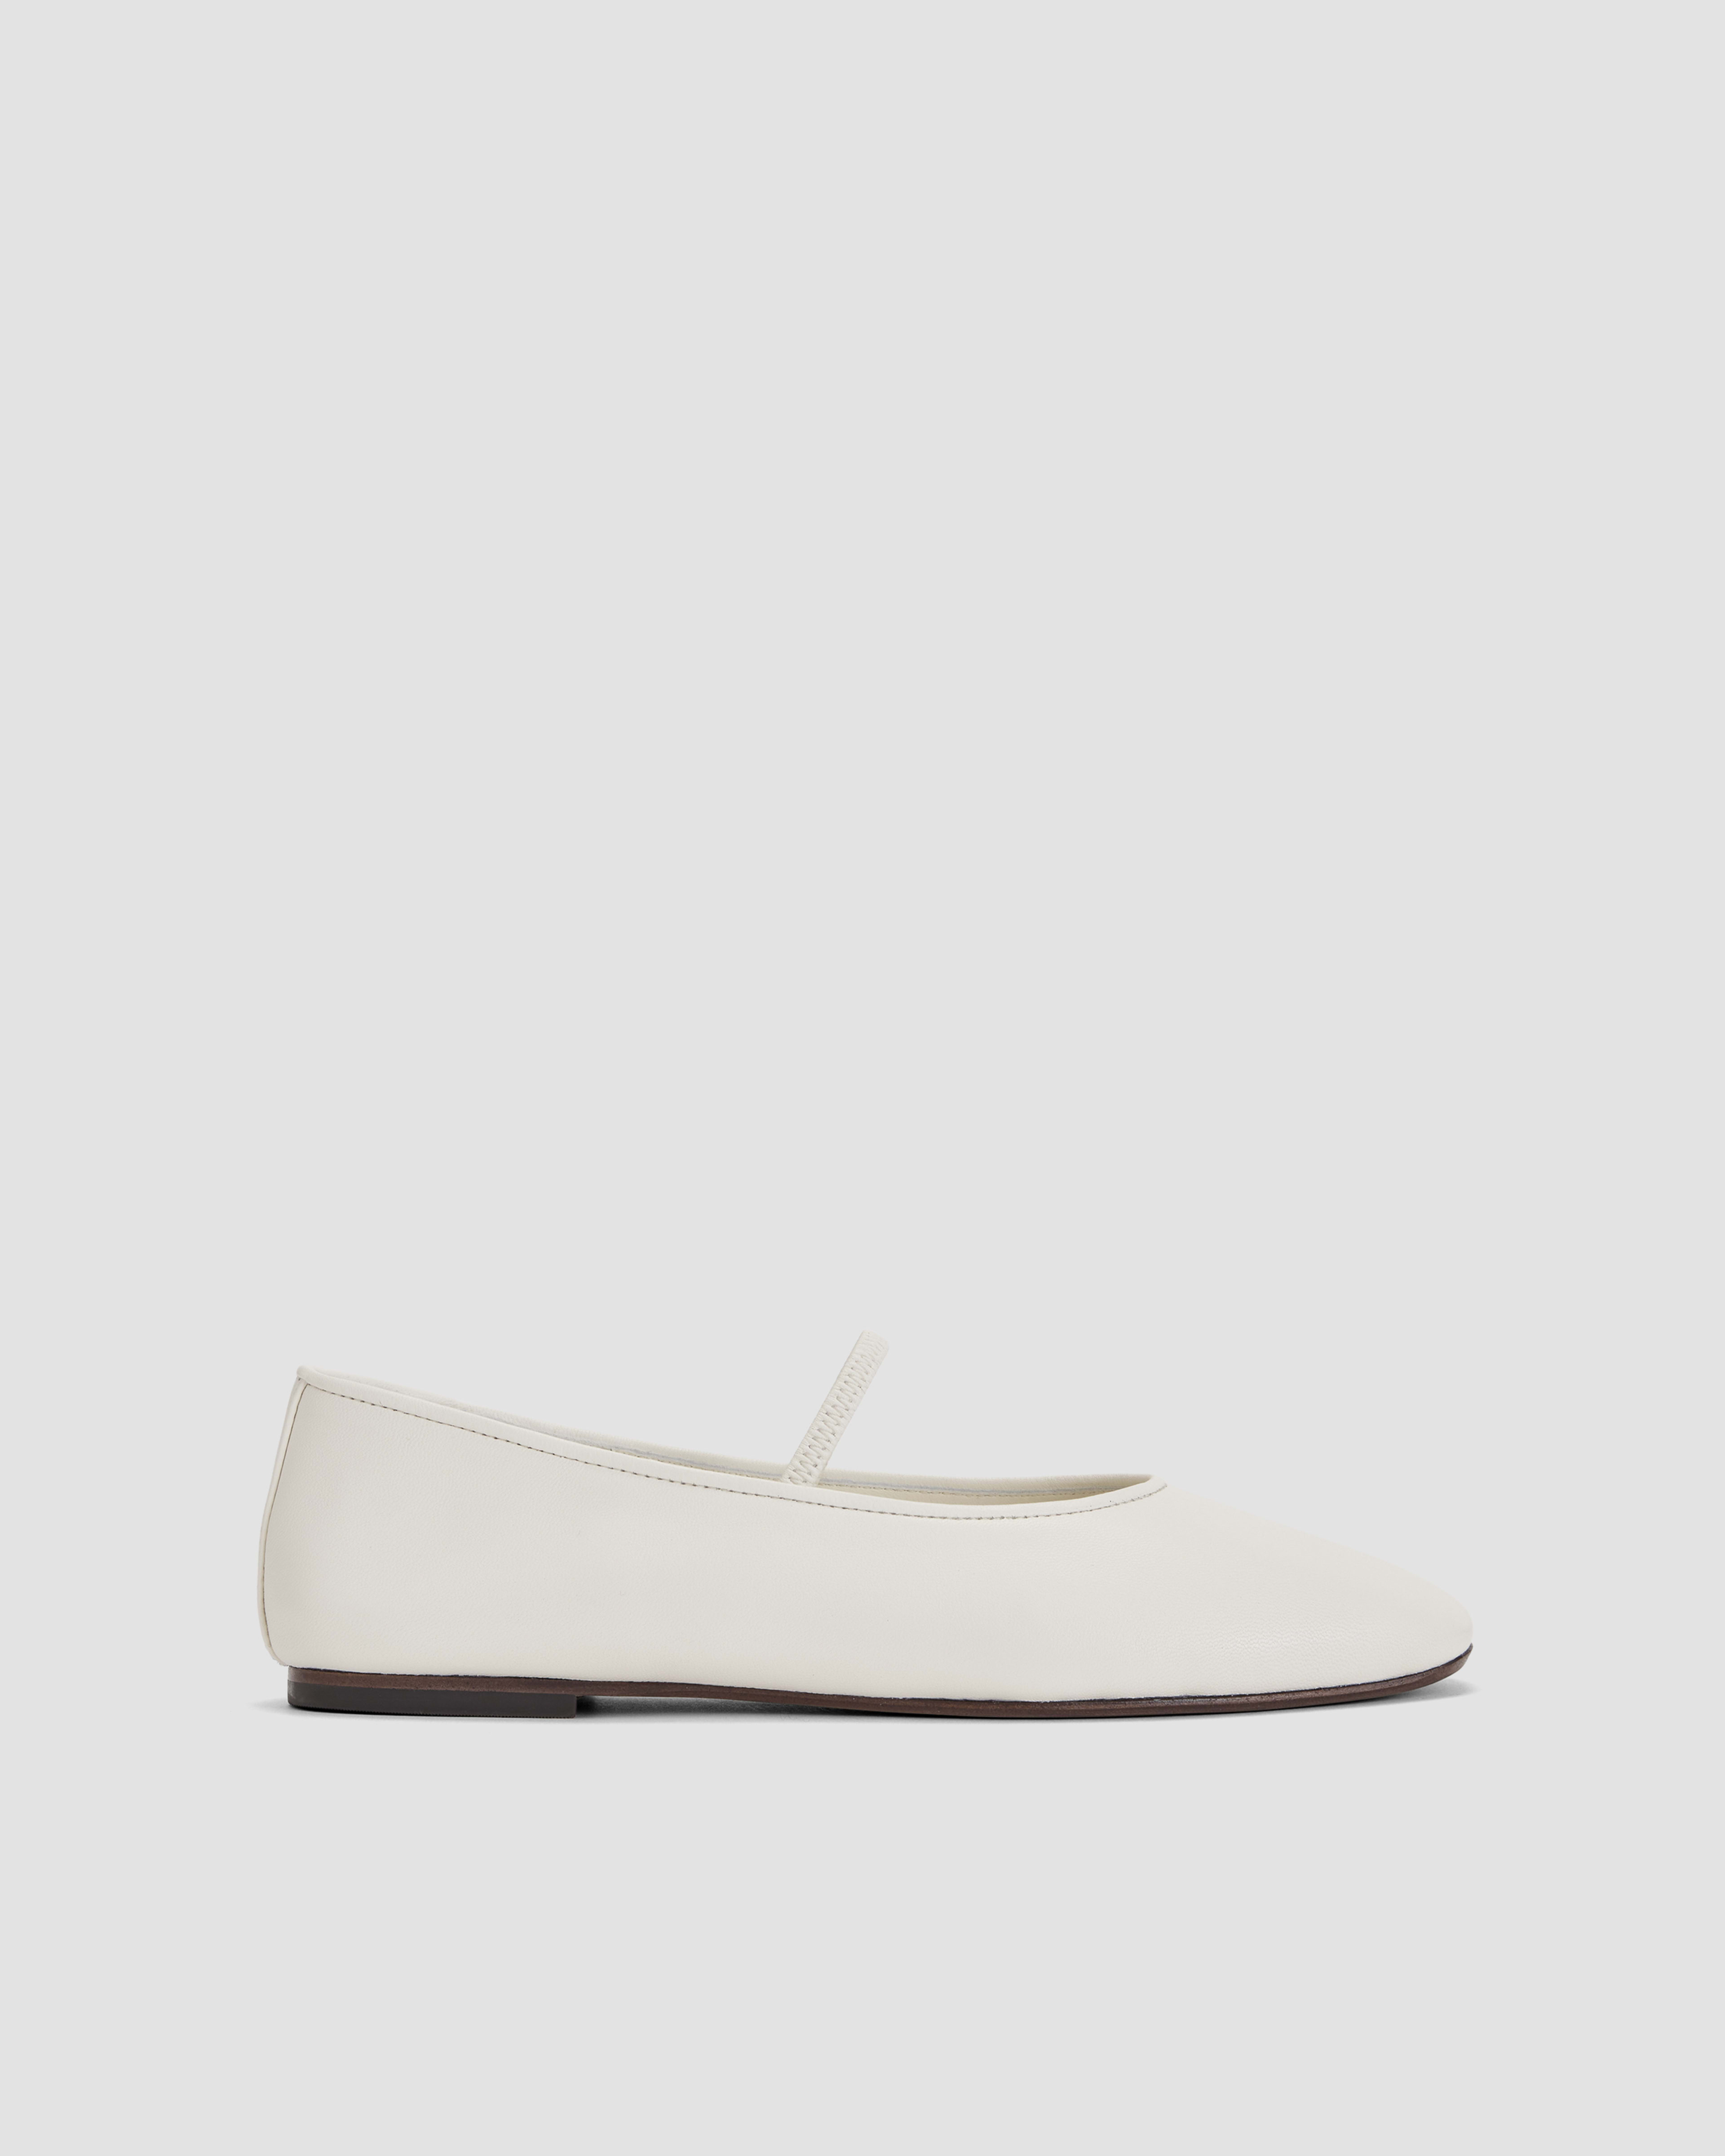 The Day Mary Jane Canvas – Everlane